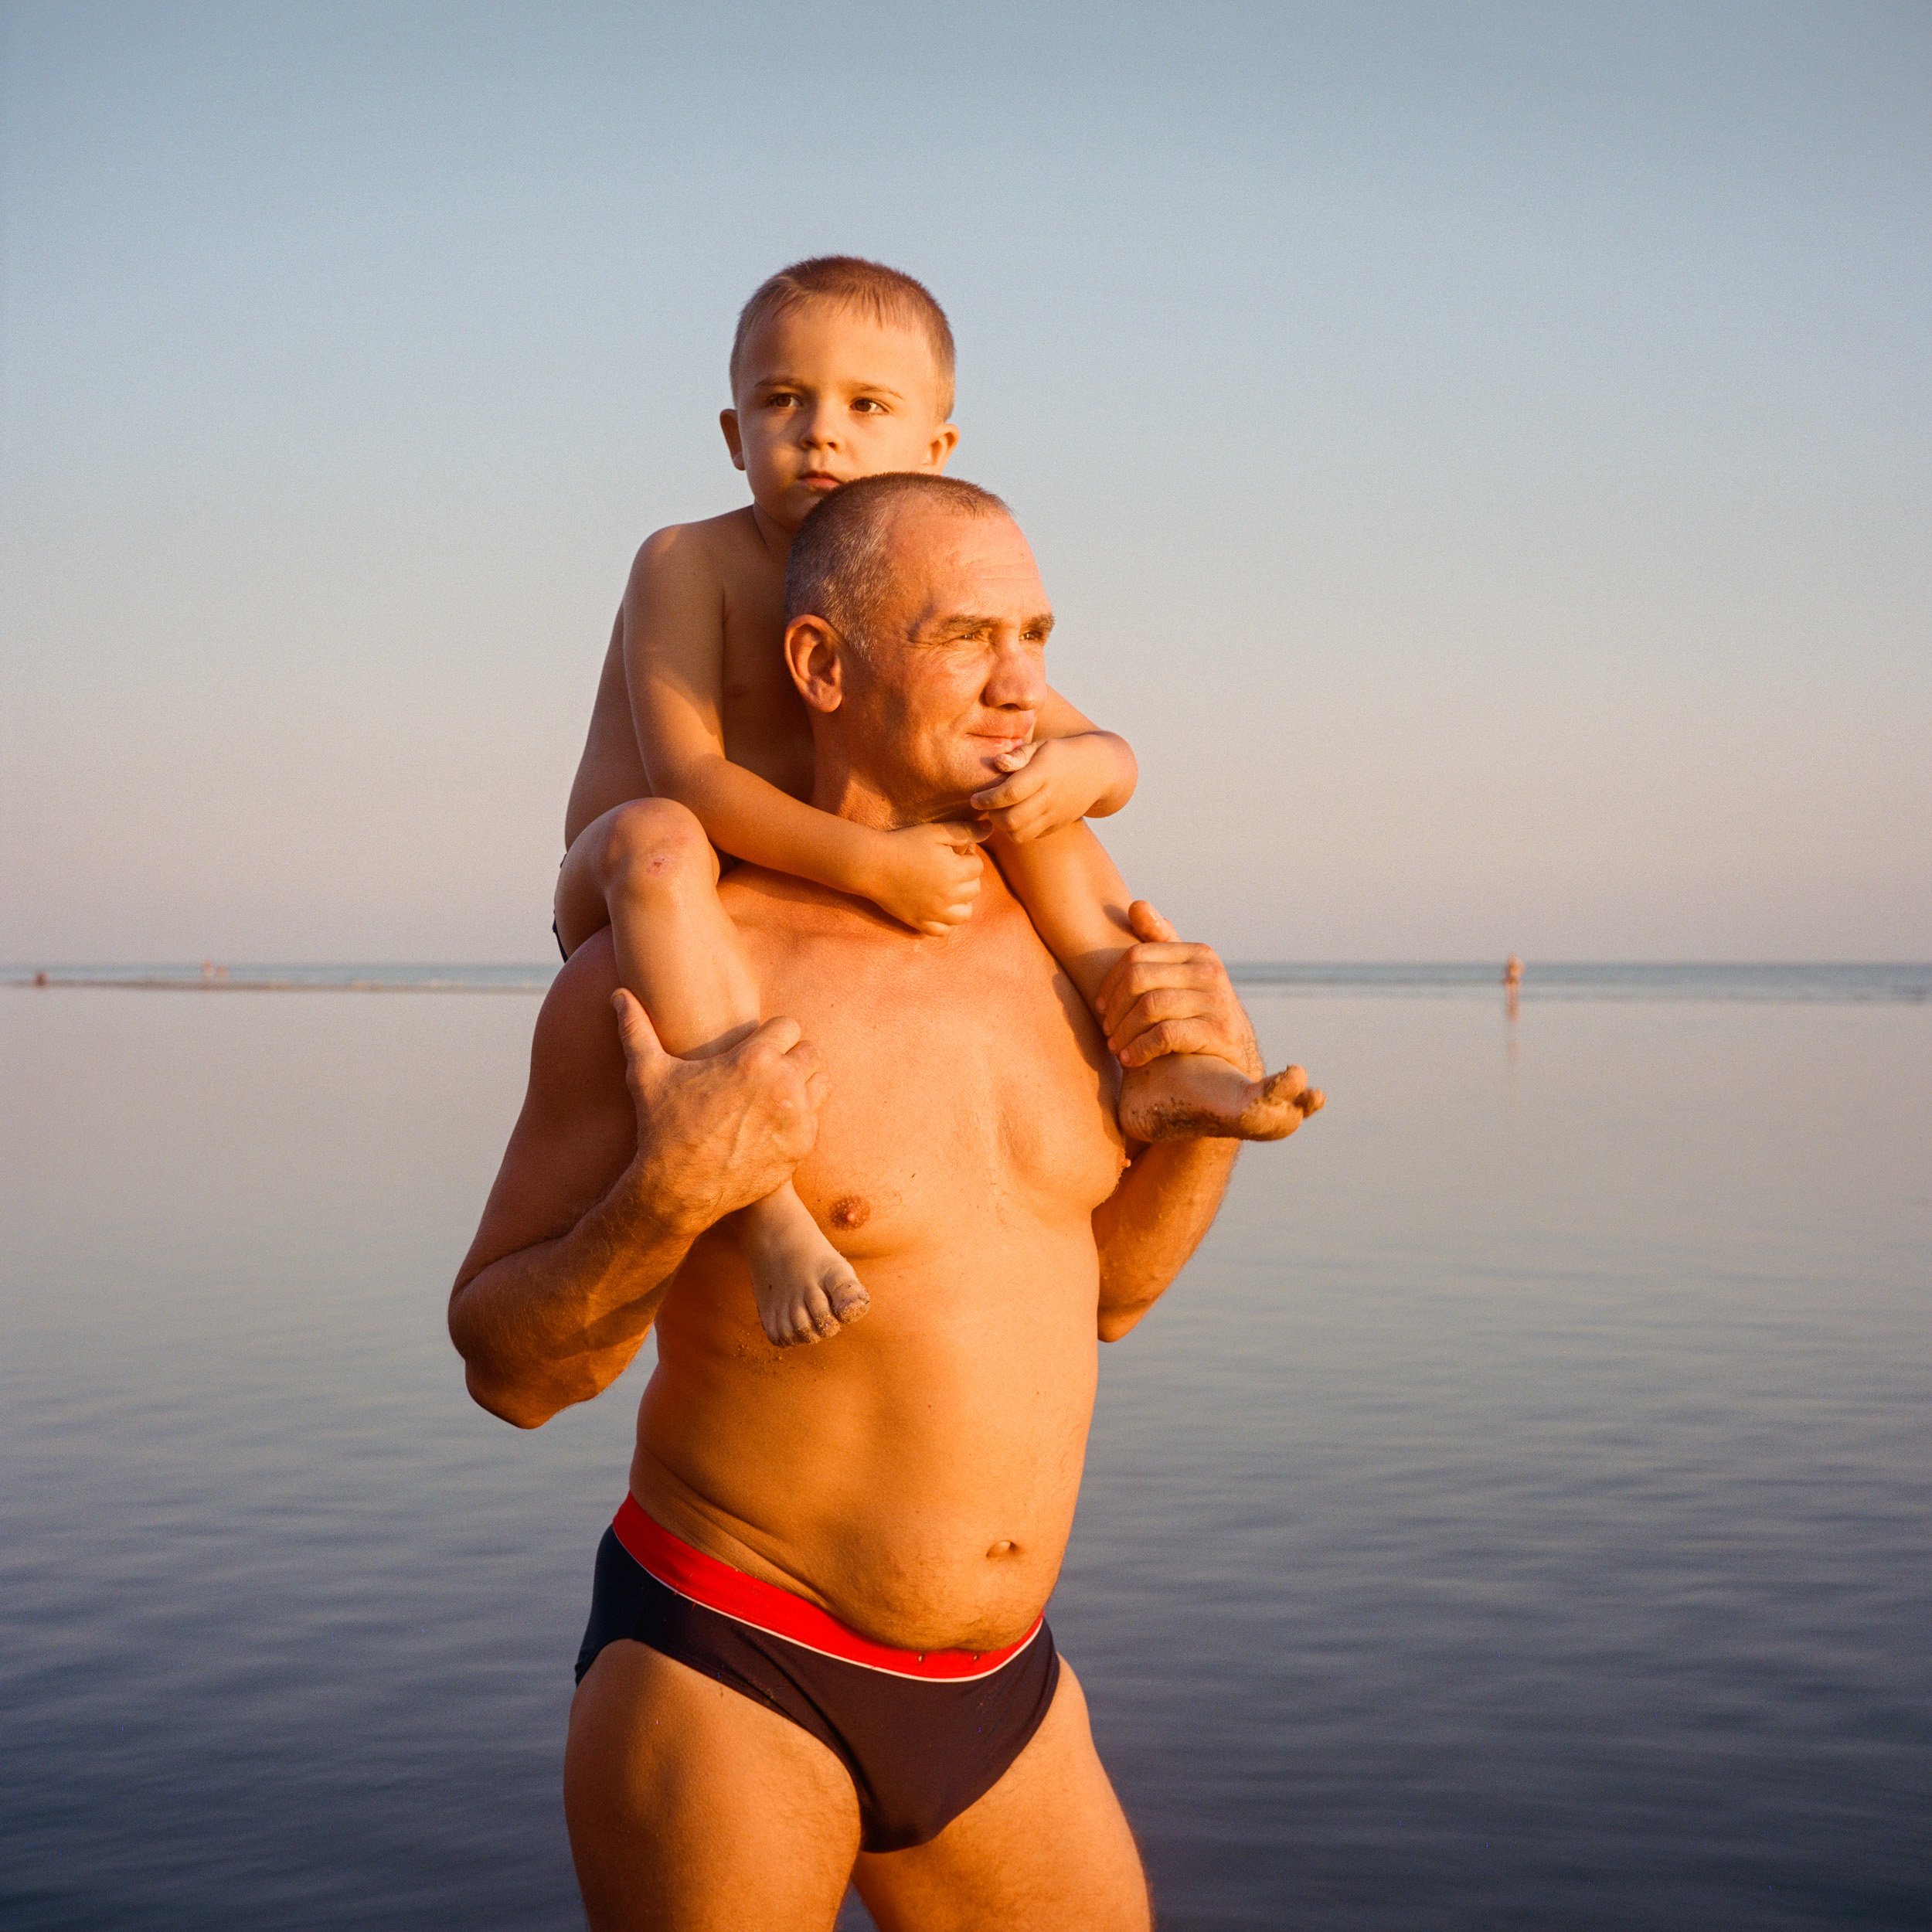  August 2021. Mariupol, Ukraine. Artem Vlasov, 41, and his son Matvey at the beach near the Azovstal steelworks. Artem used to work at the steel plant, the major employer of the industrial city.  